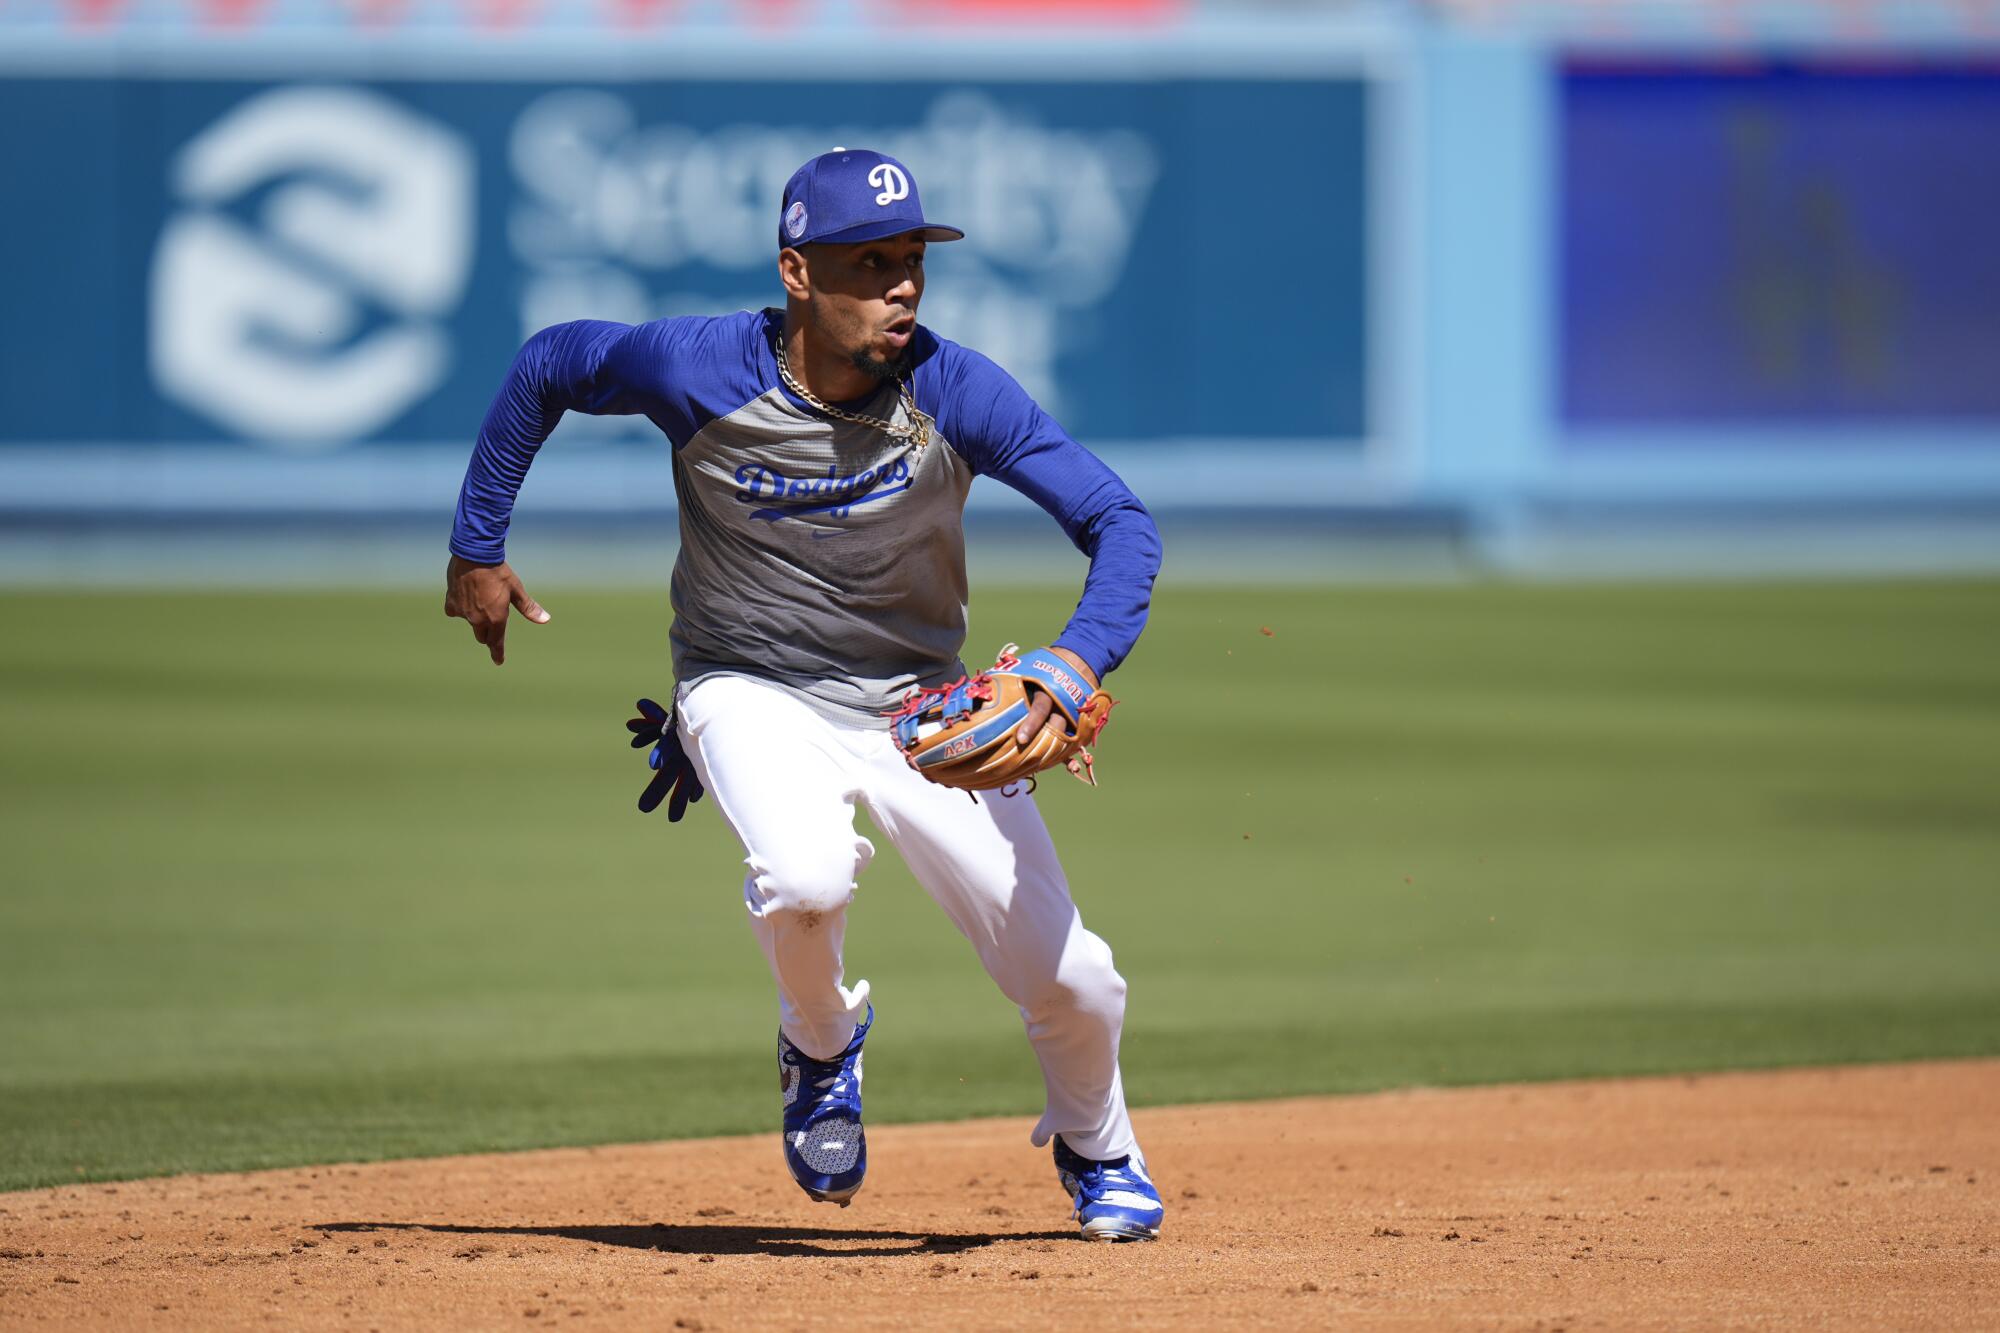 Dodgers shortstop Mookie Betts chases a ground ball during practice before the team played the Cardinals on Friday.